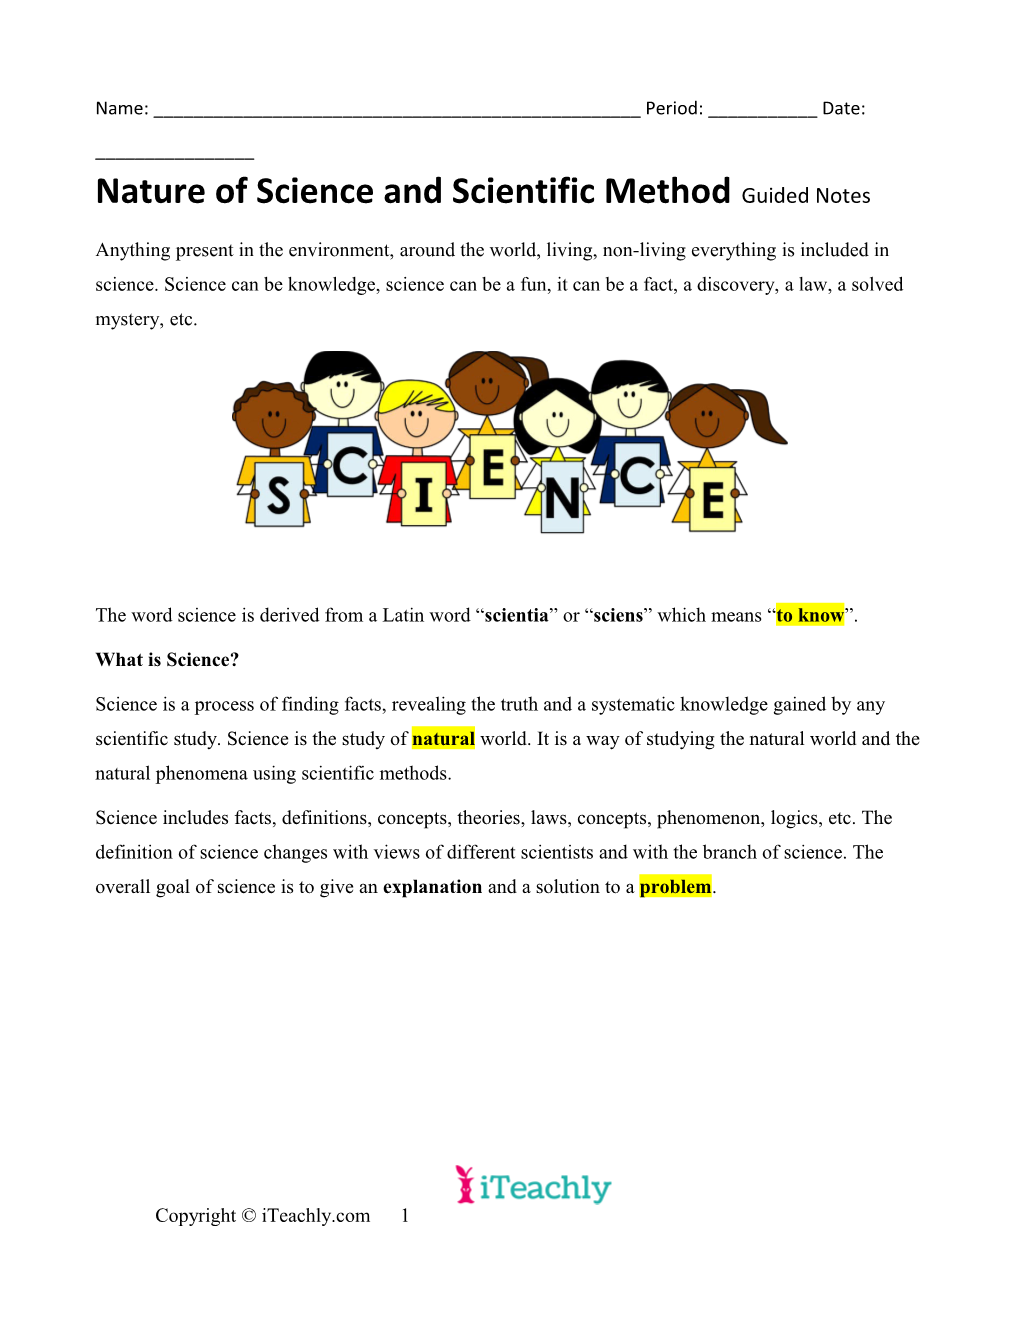 Nature of Science and Scientific Method Guided Notes